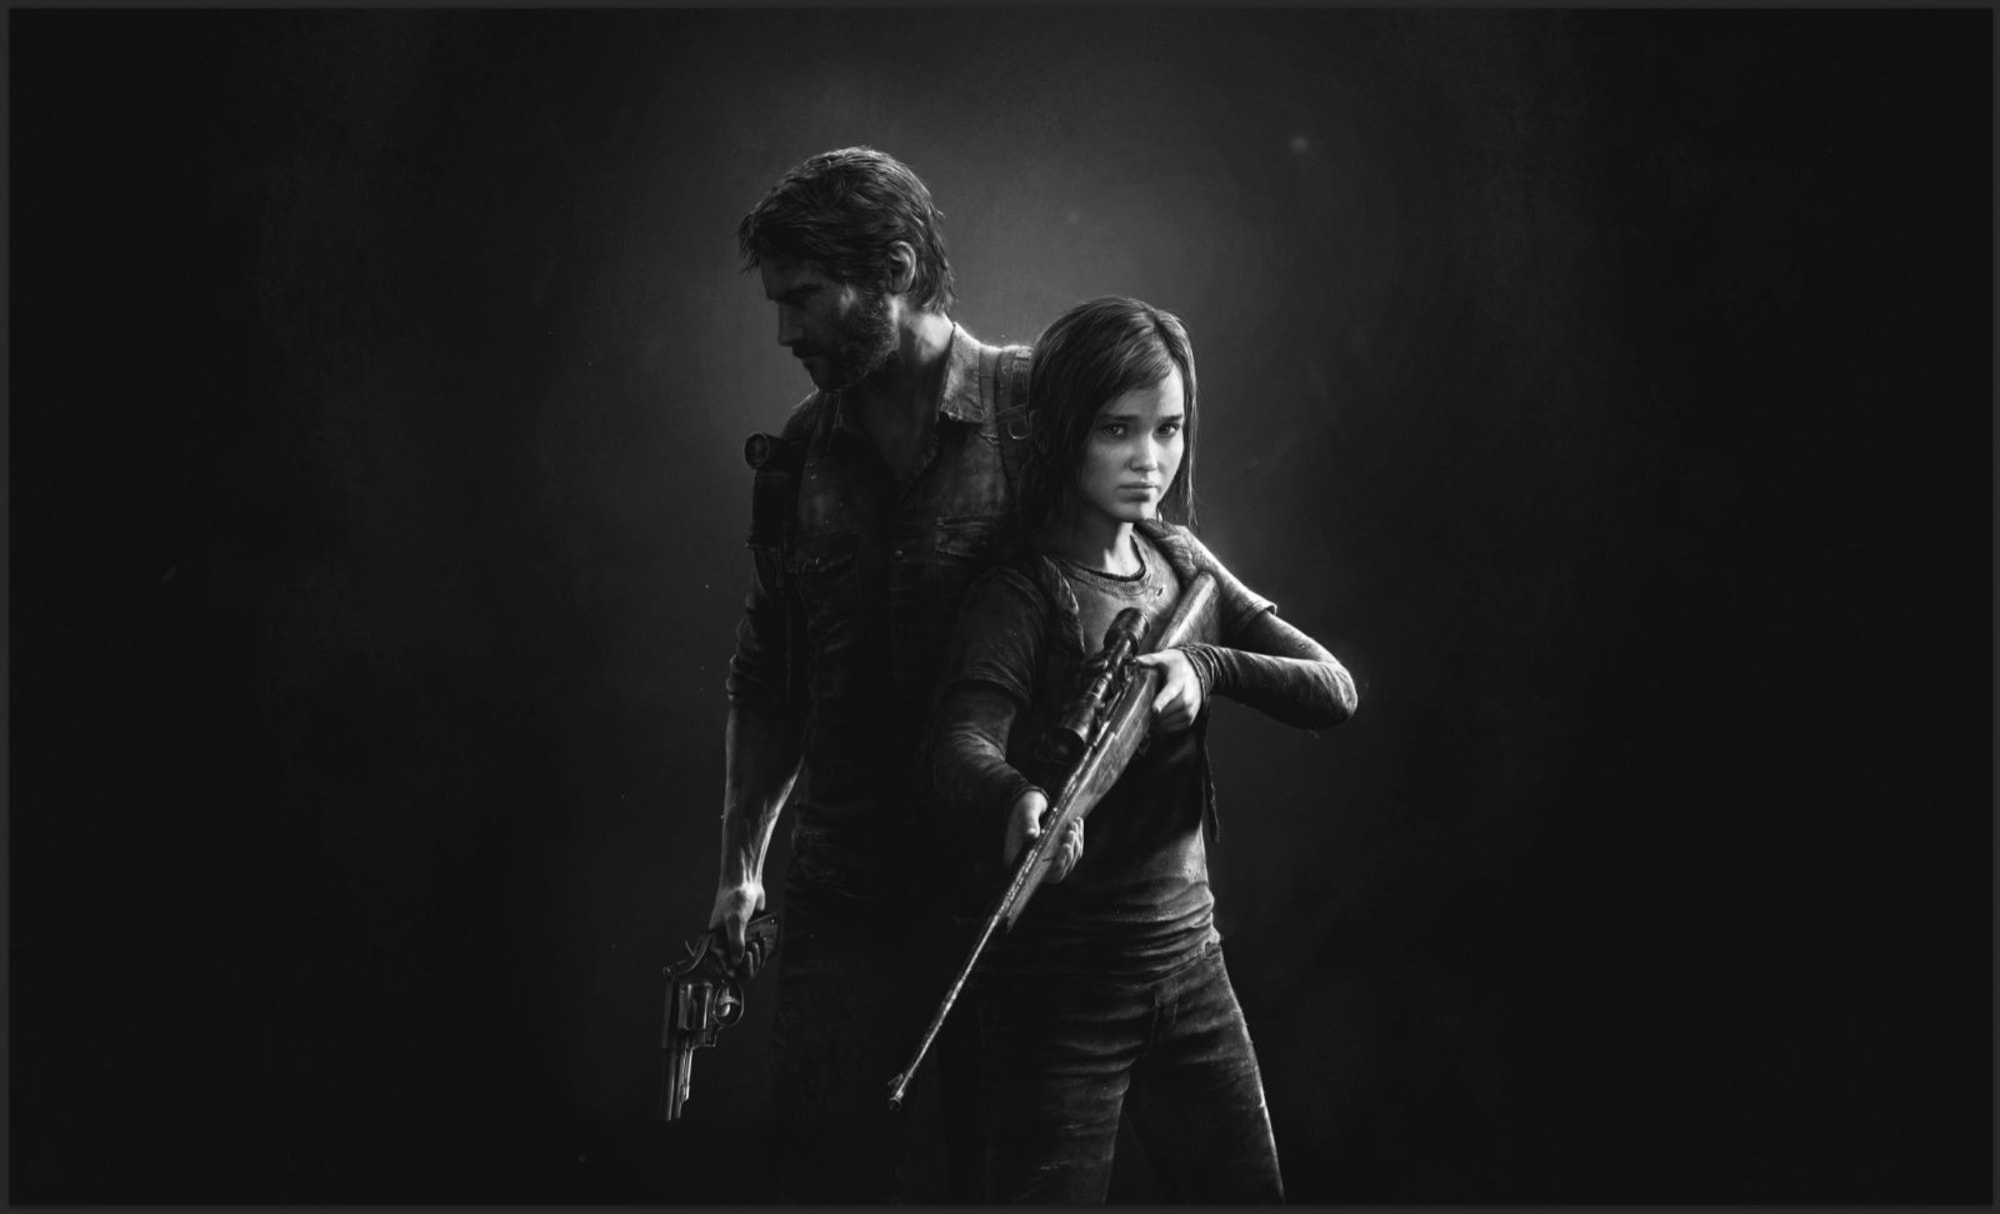 The Last of Us' Season 1 Ending Explained: What Happened?